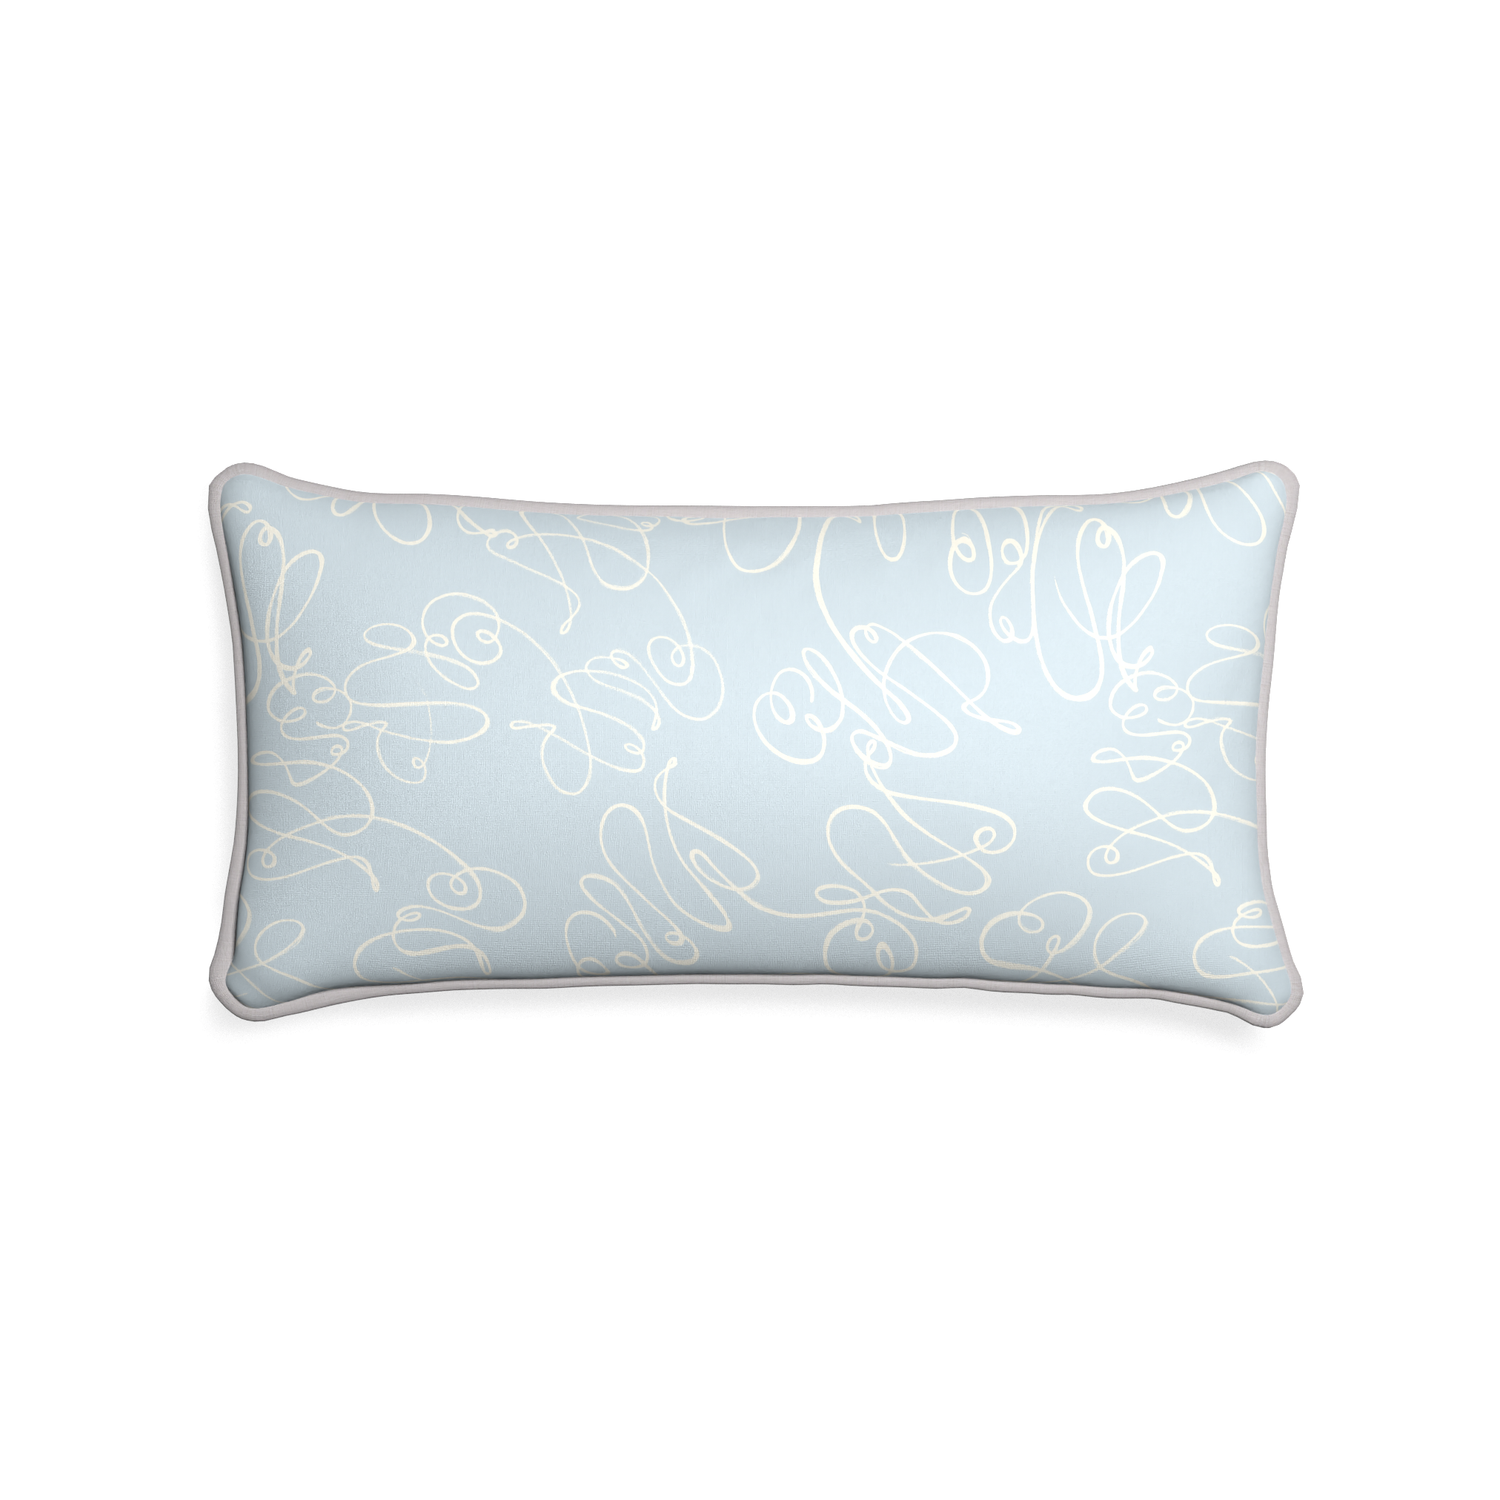 Midi-lumbar mirabella custom powder blue abstractpillow with pebble piping on white background